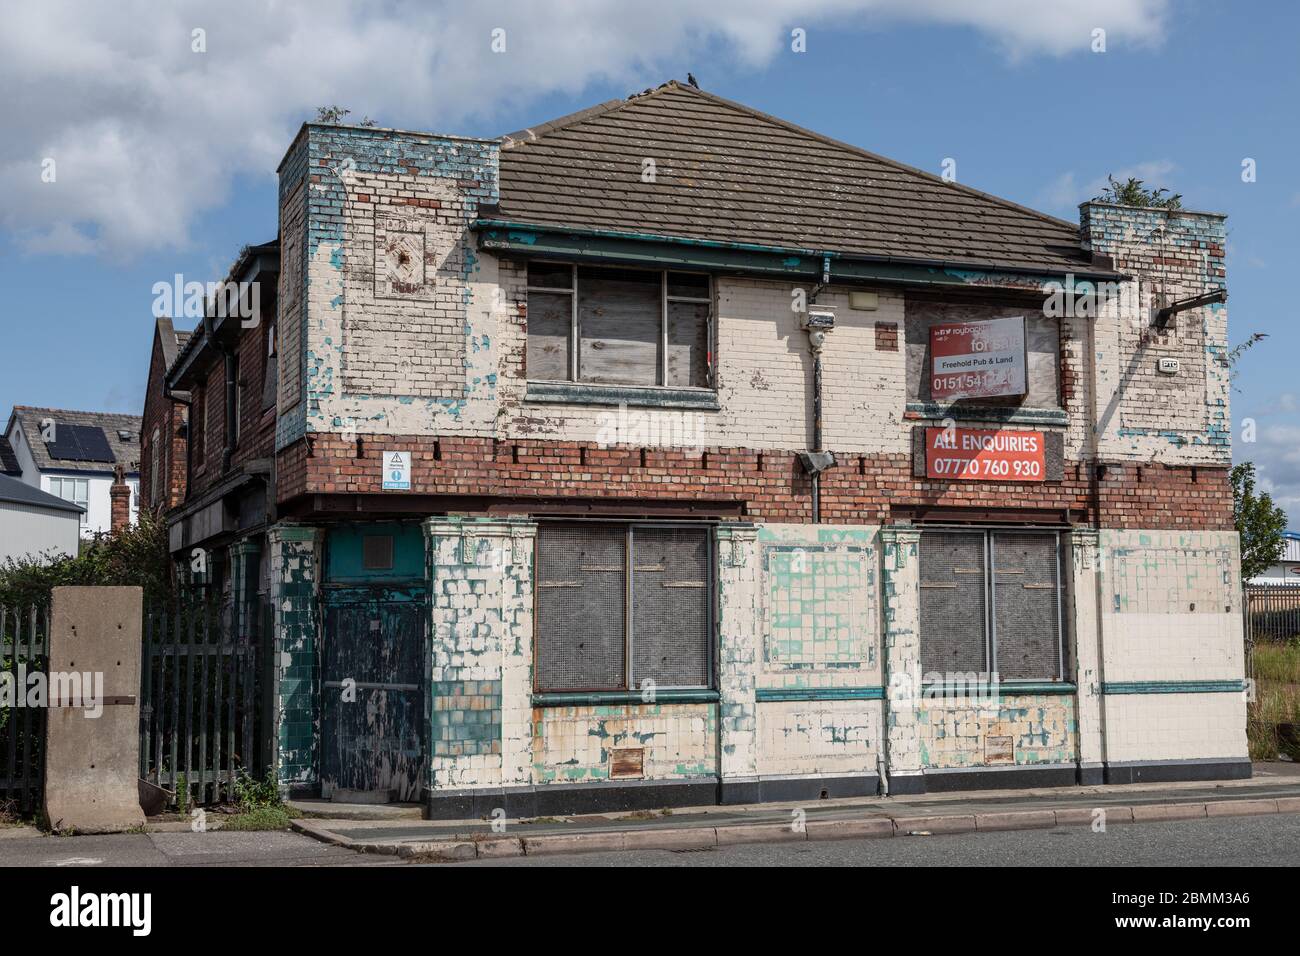 Derelict former pub building for sale in Wallasey Wirral August 2019 Stock Photo